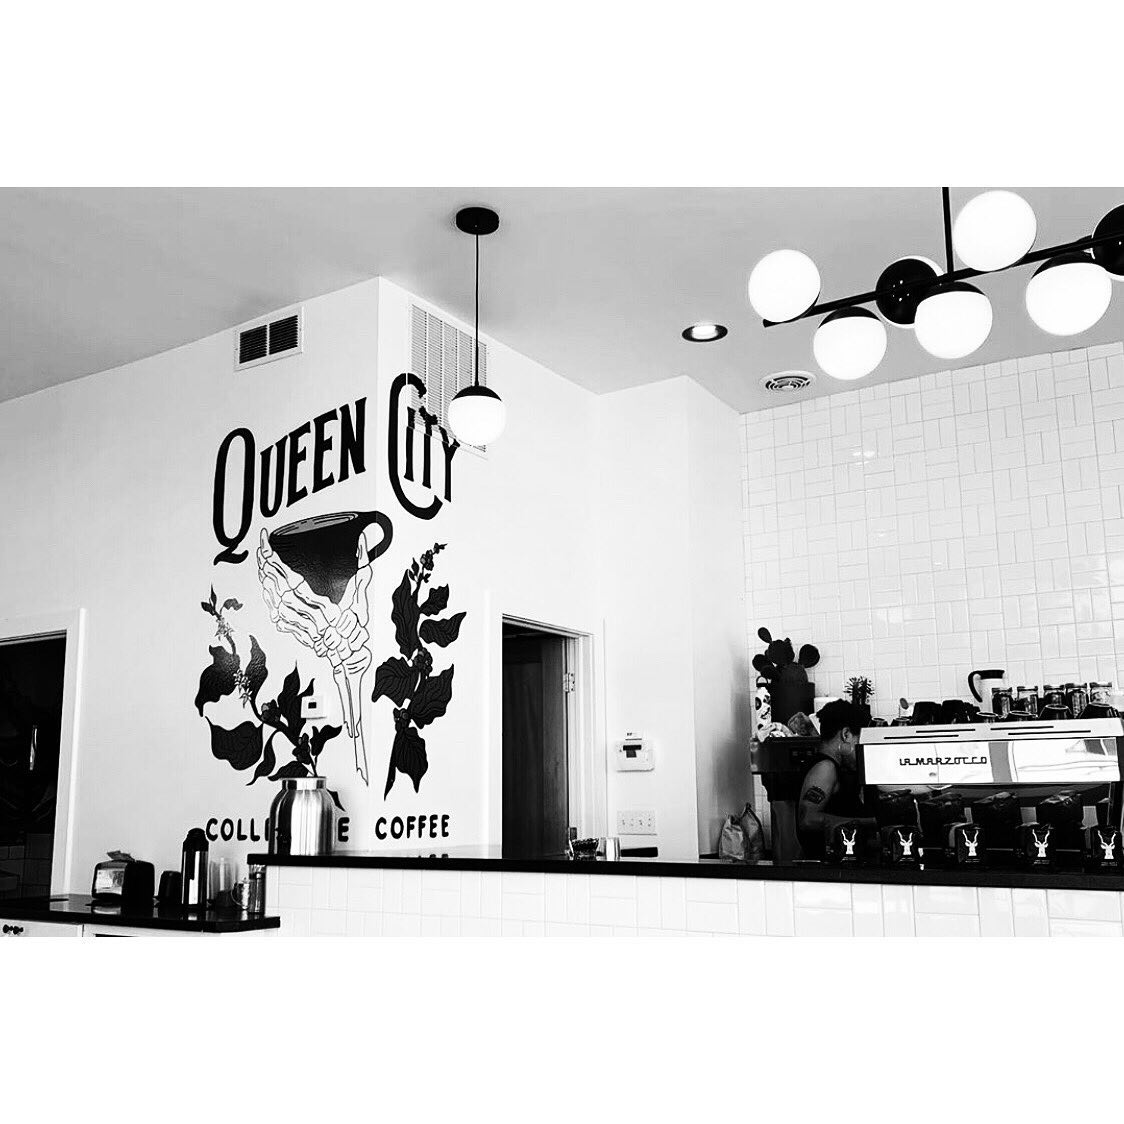 A view of the espresso bar at Queen City Collective Coffee in Five Points with a large graphic showing a tattoo holding a coffee mug on the wall to the left 